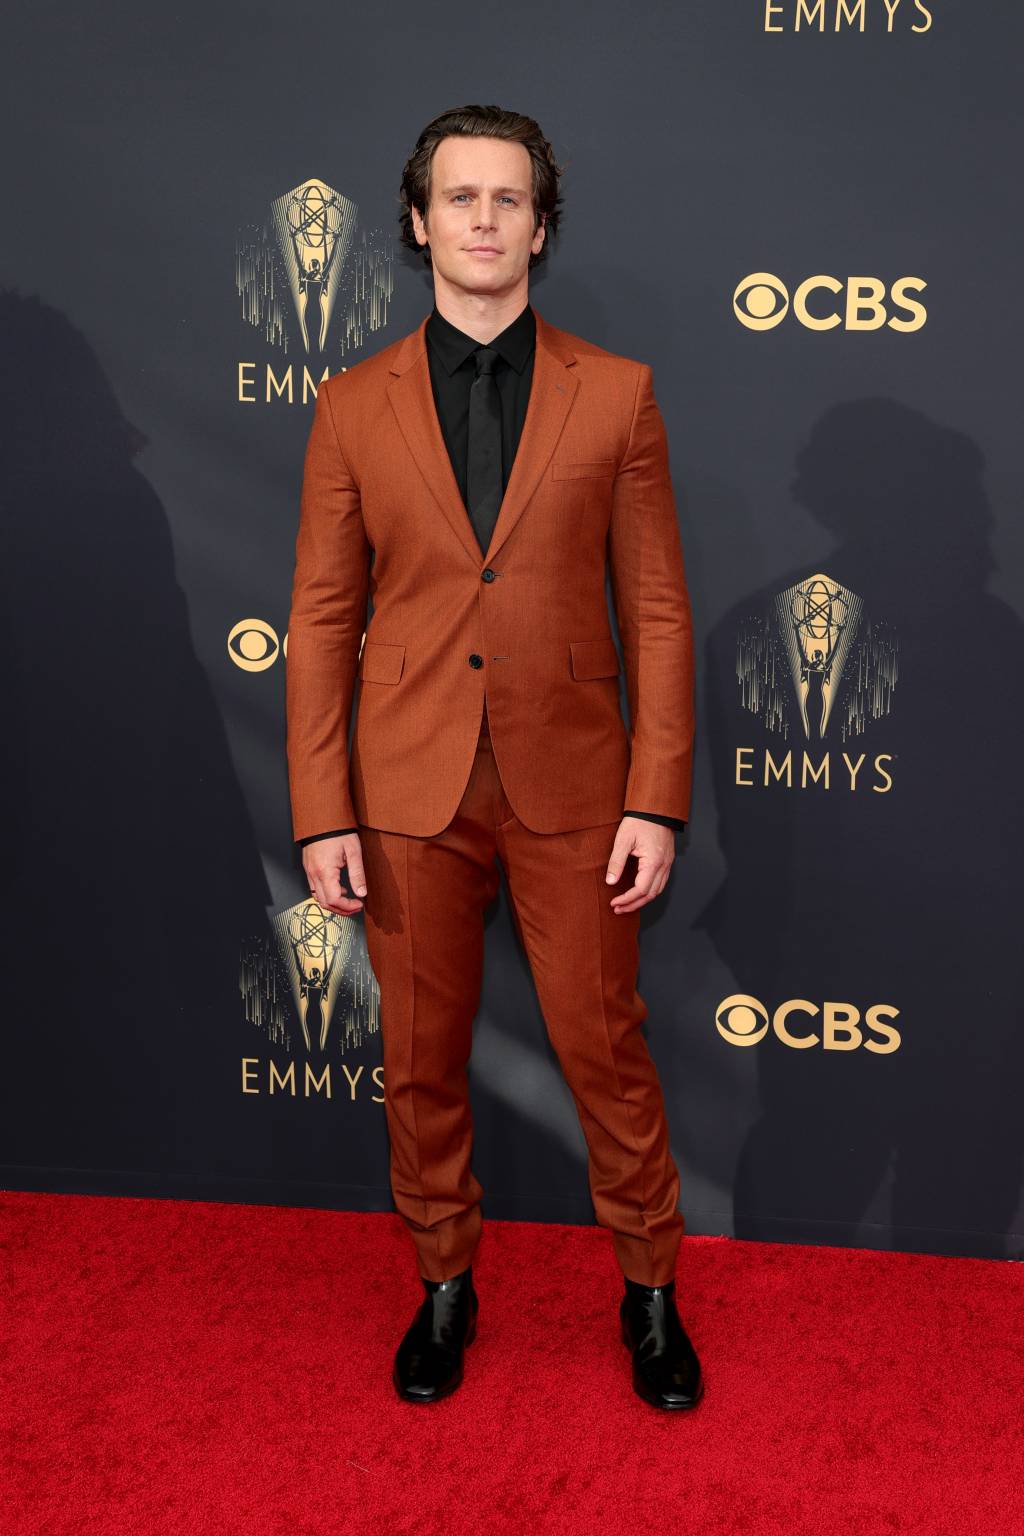 LOS ANGELES, CALIFORNIA - SEPTEMBER 19: Jonathan Groff attends the 73rd Primetime Emmy Awards at L.A. LIVE on September 19, 2021 in Los Angeles, California. (Photo by Rich Fury/Getty Images)